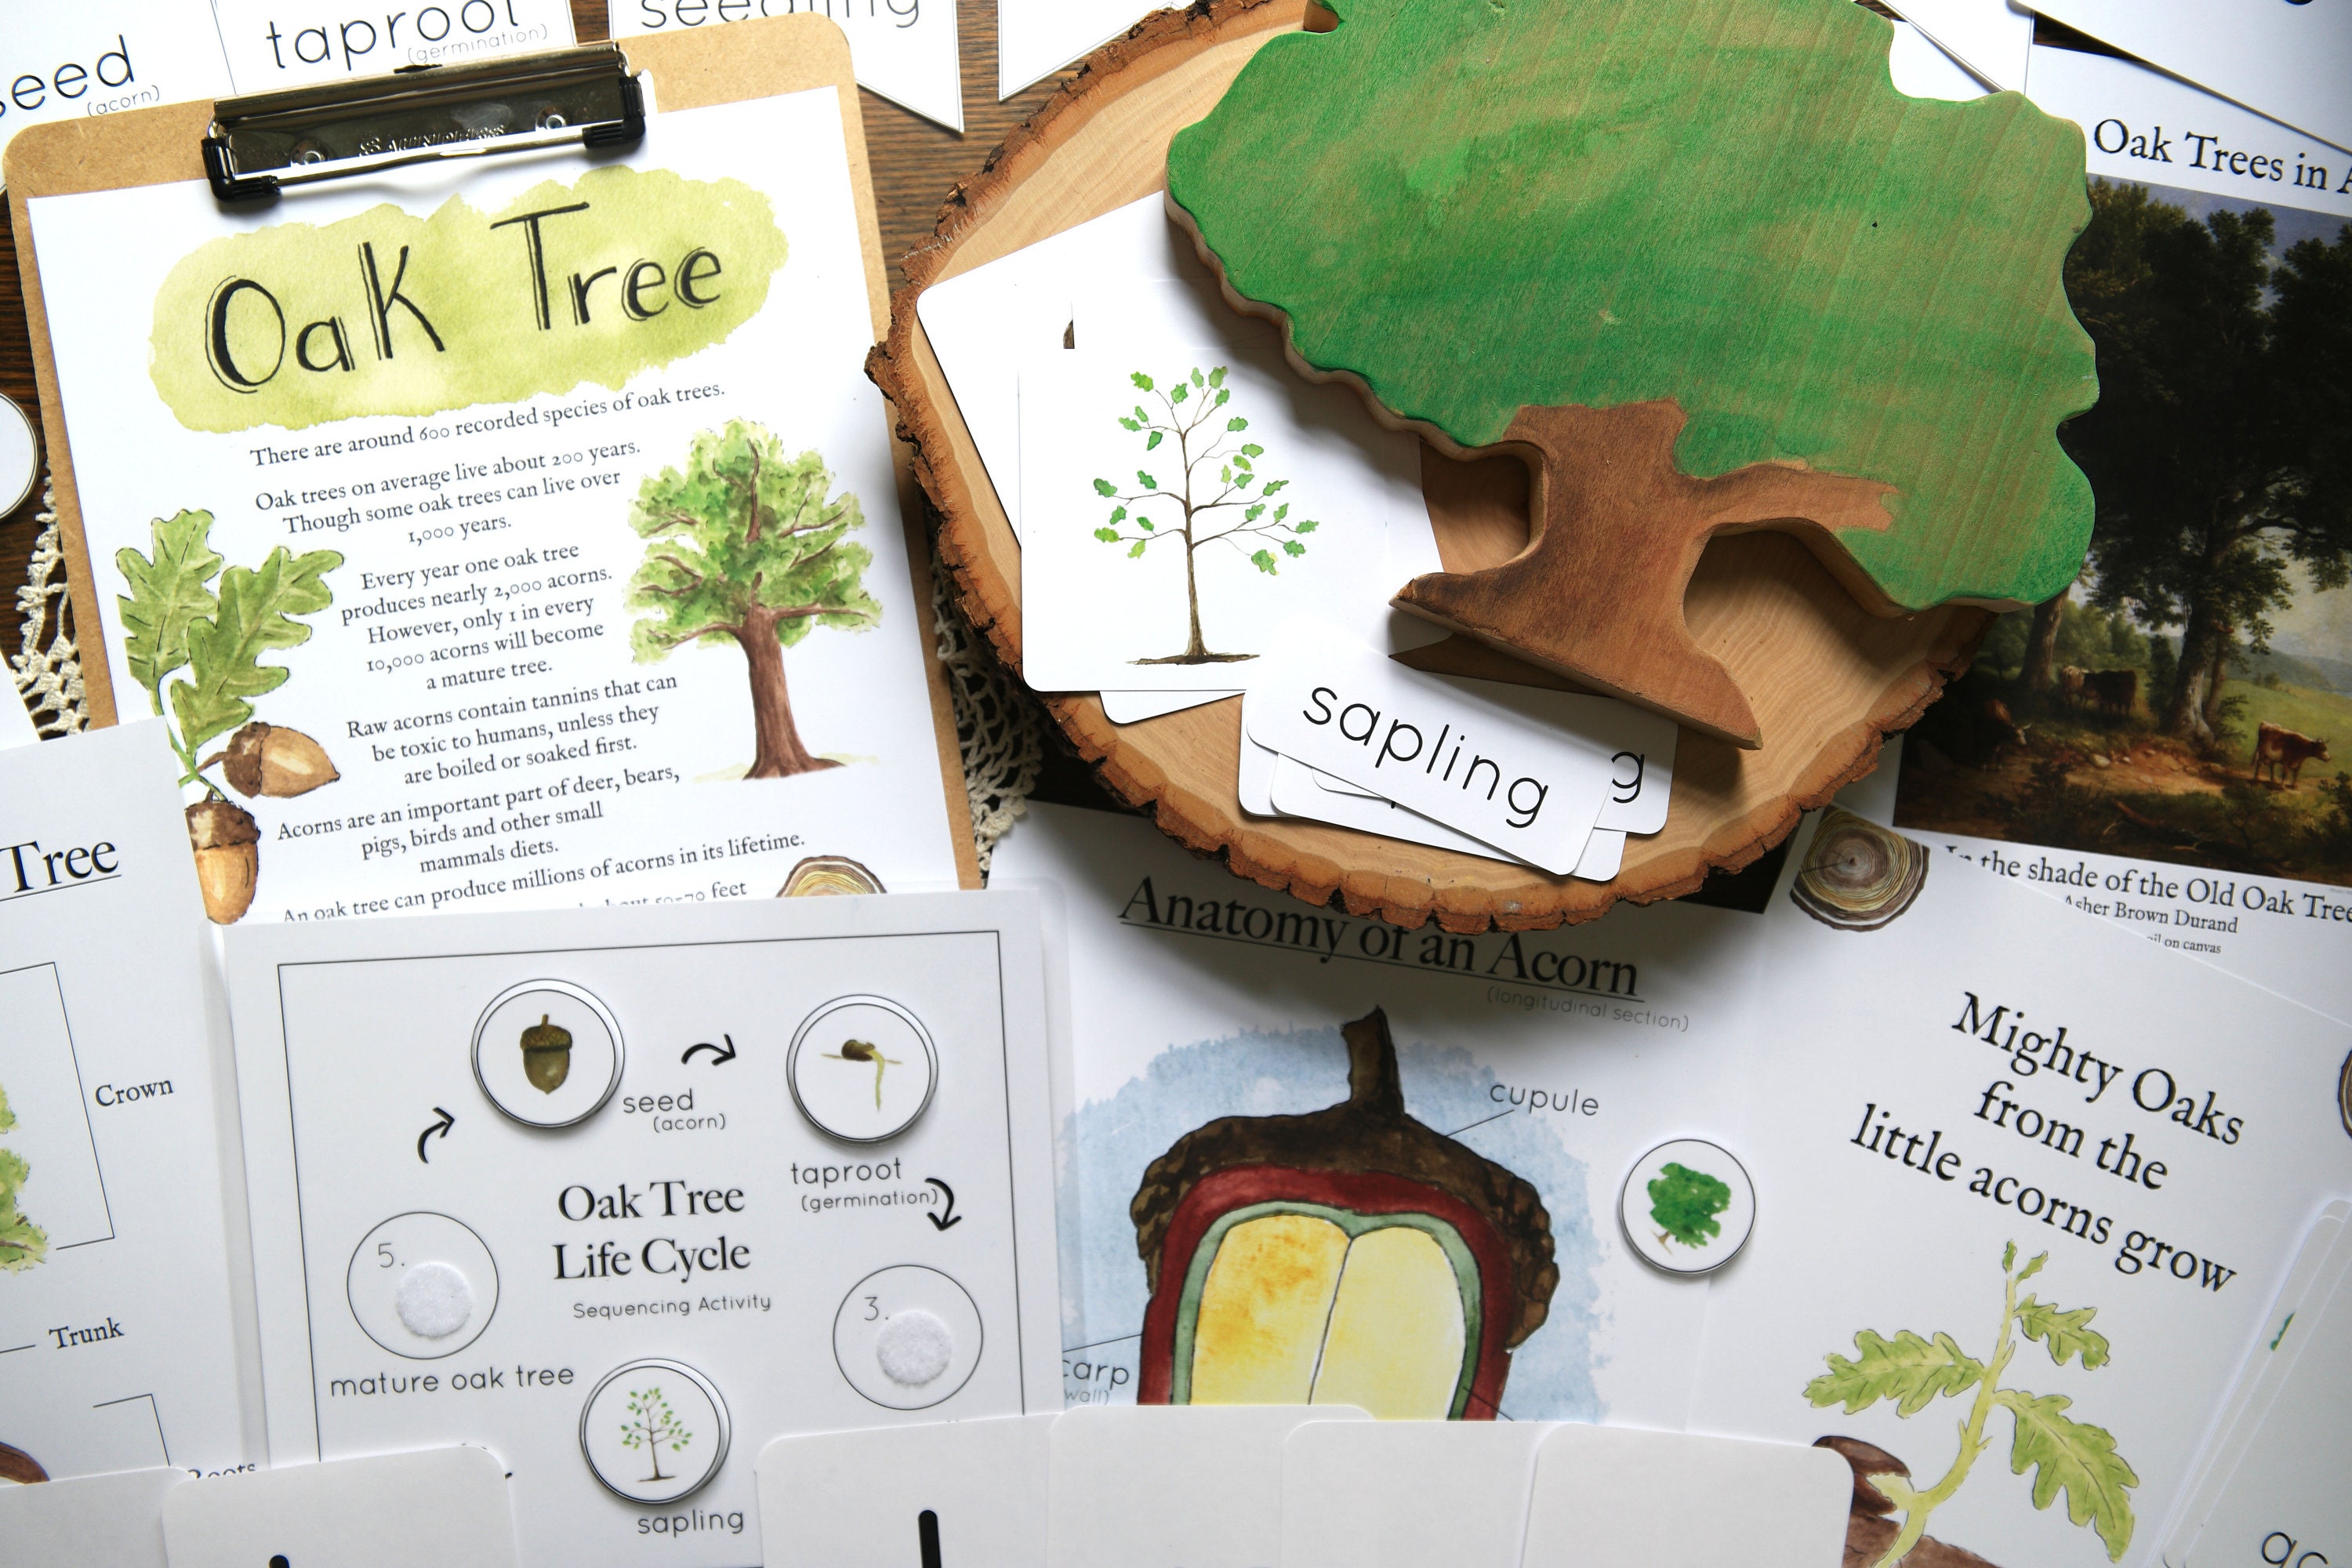 Life Cycle and Memory Game Instructions: Nature Camp, Ohio Learns 360